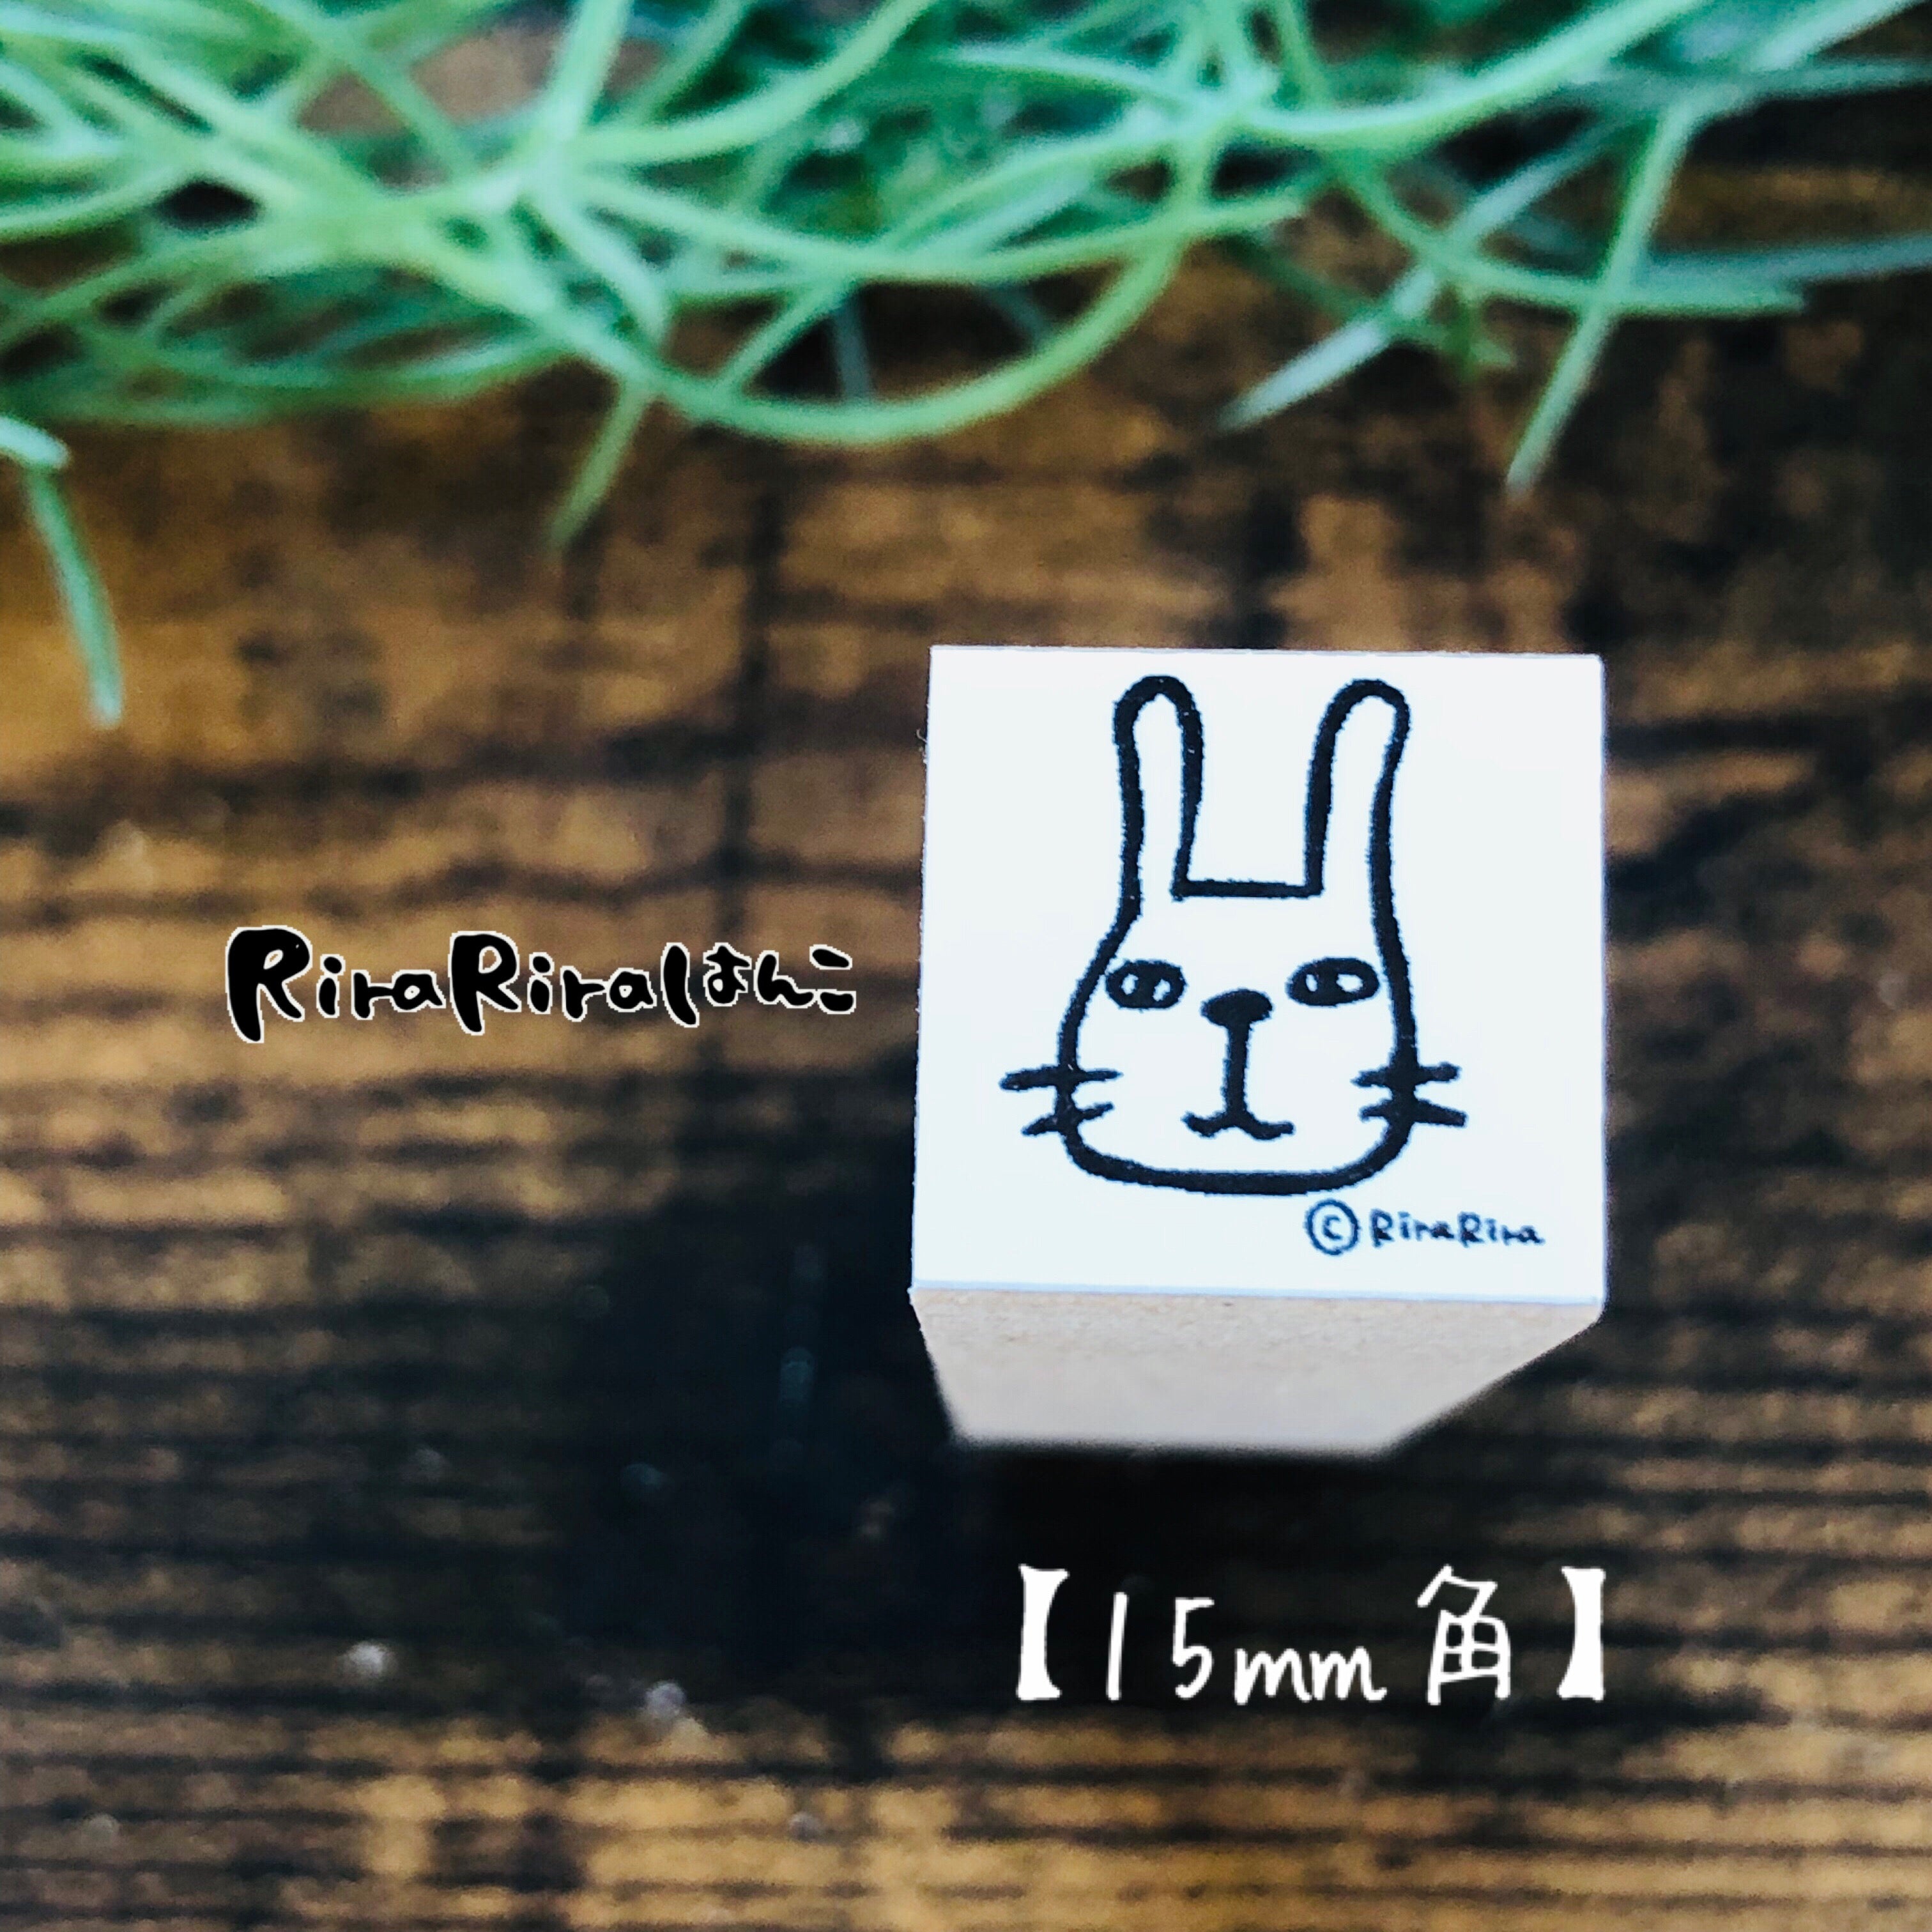 Relaxed Rabbit "Face Stamp"